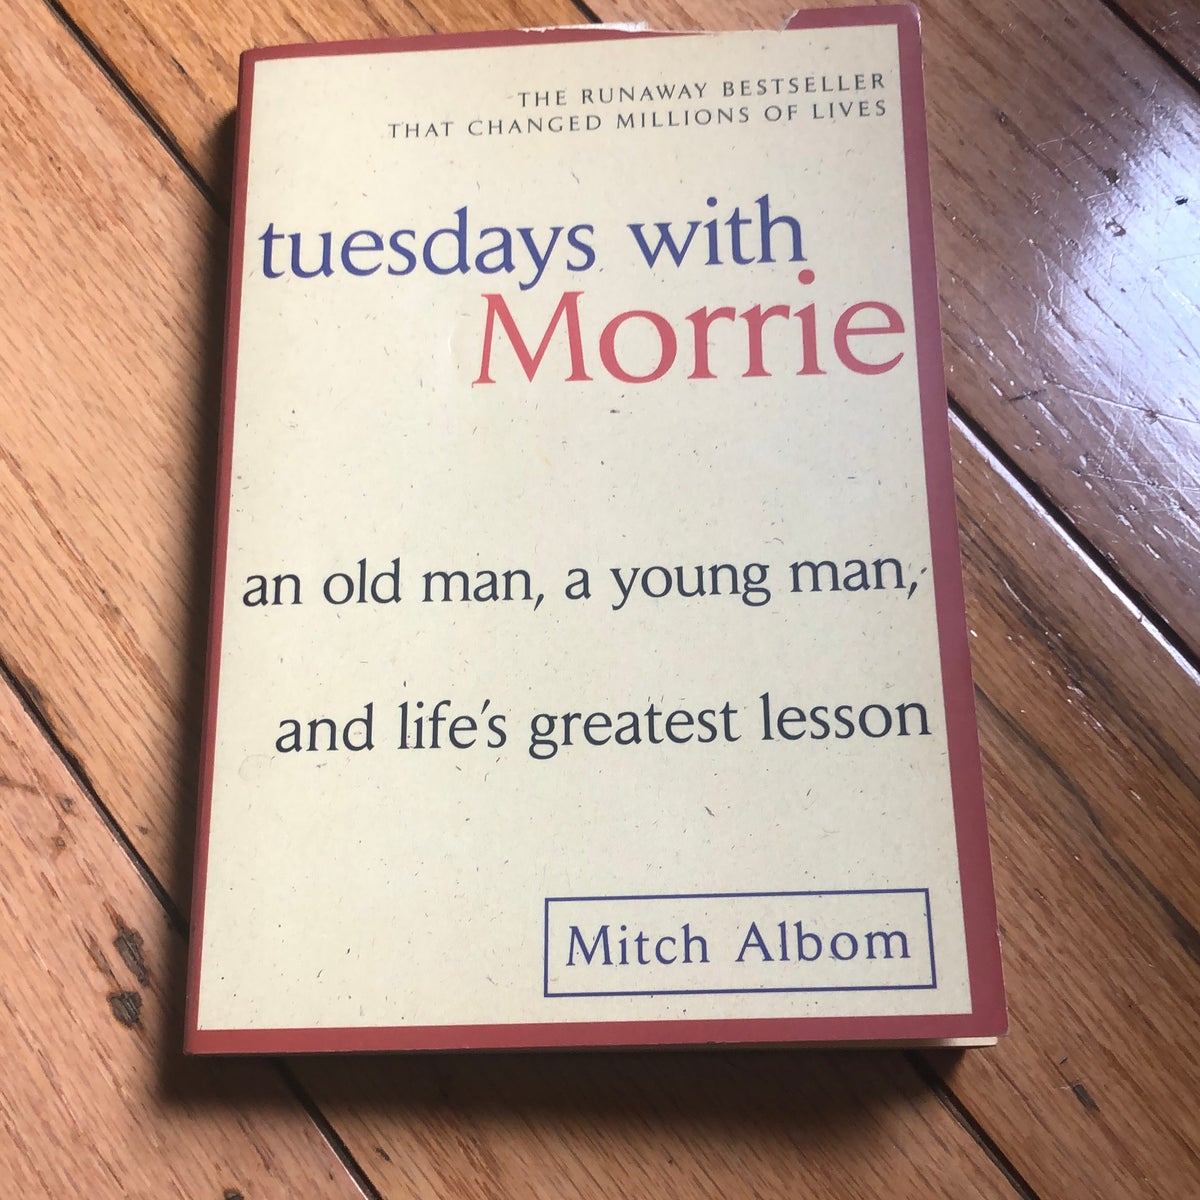 Tuesdays with Morrie - an old man, a young man, and life's greatest lesson  - The First Edition Rare Books